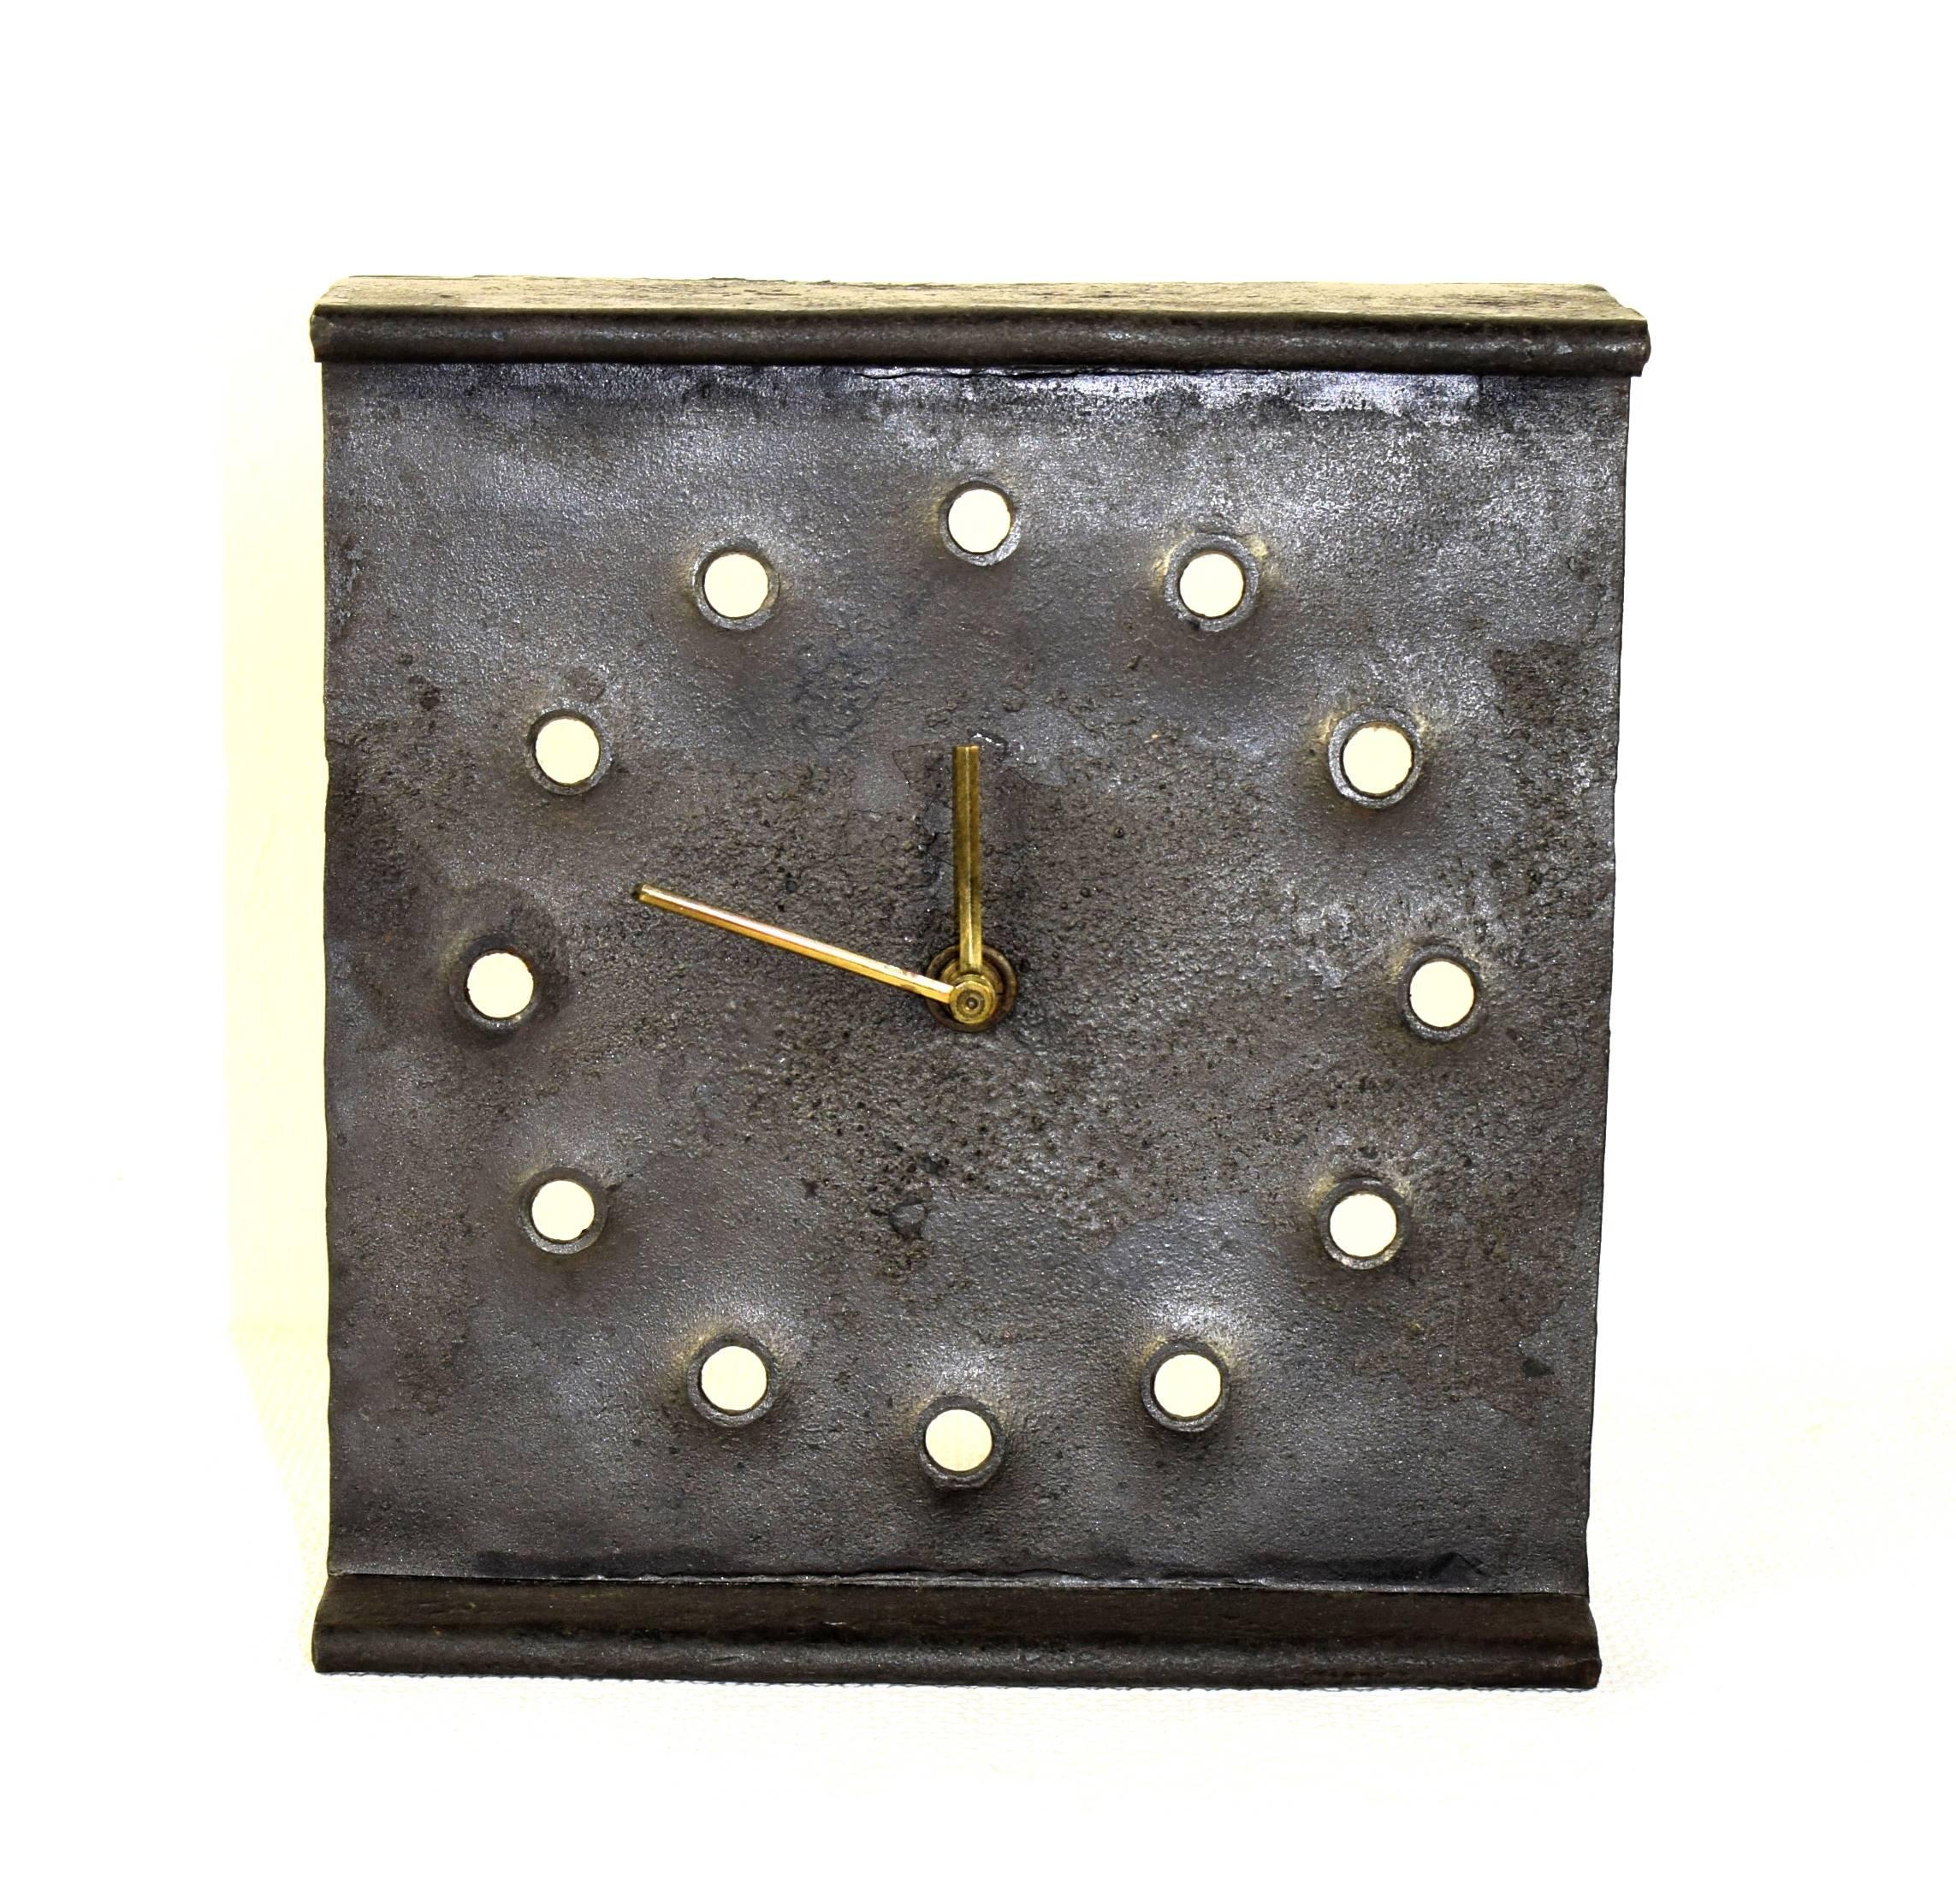 Large table clock made of a thick steel sheet - handwork!
Works perfectly. Very good condition. 
Measurements: 18 cm wide, 20cm high.